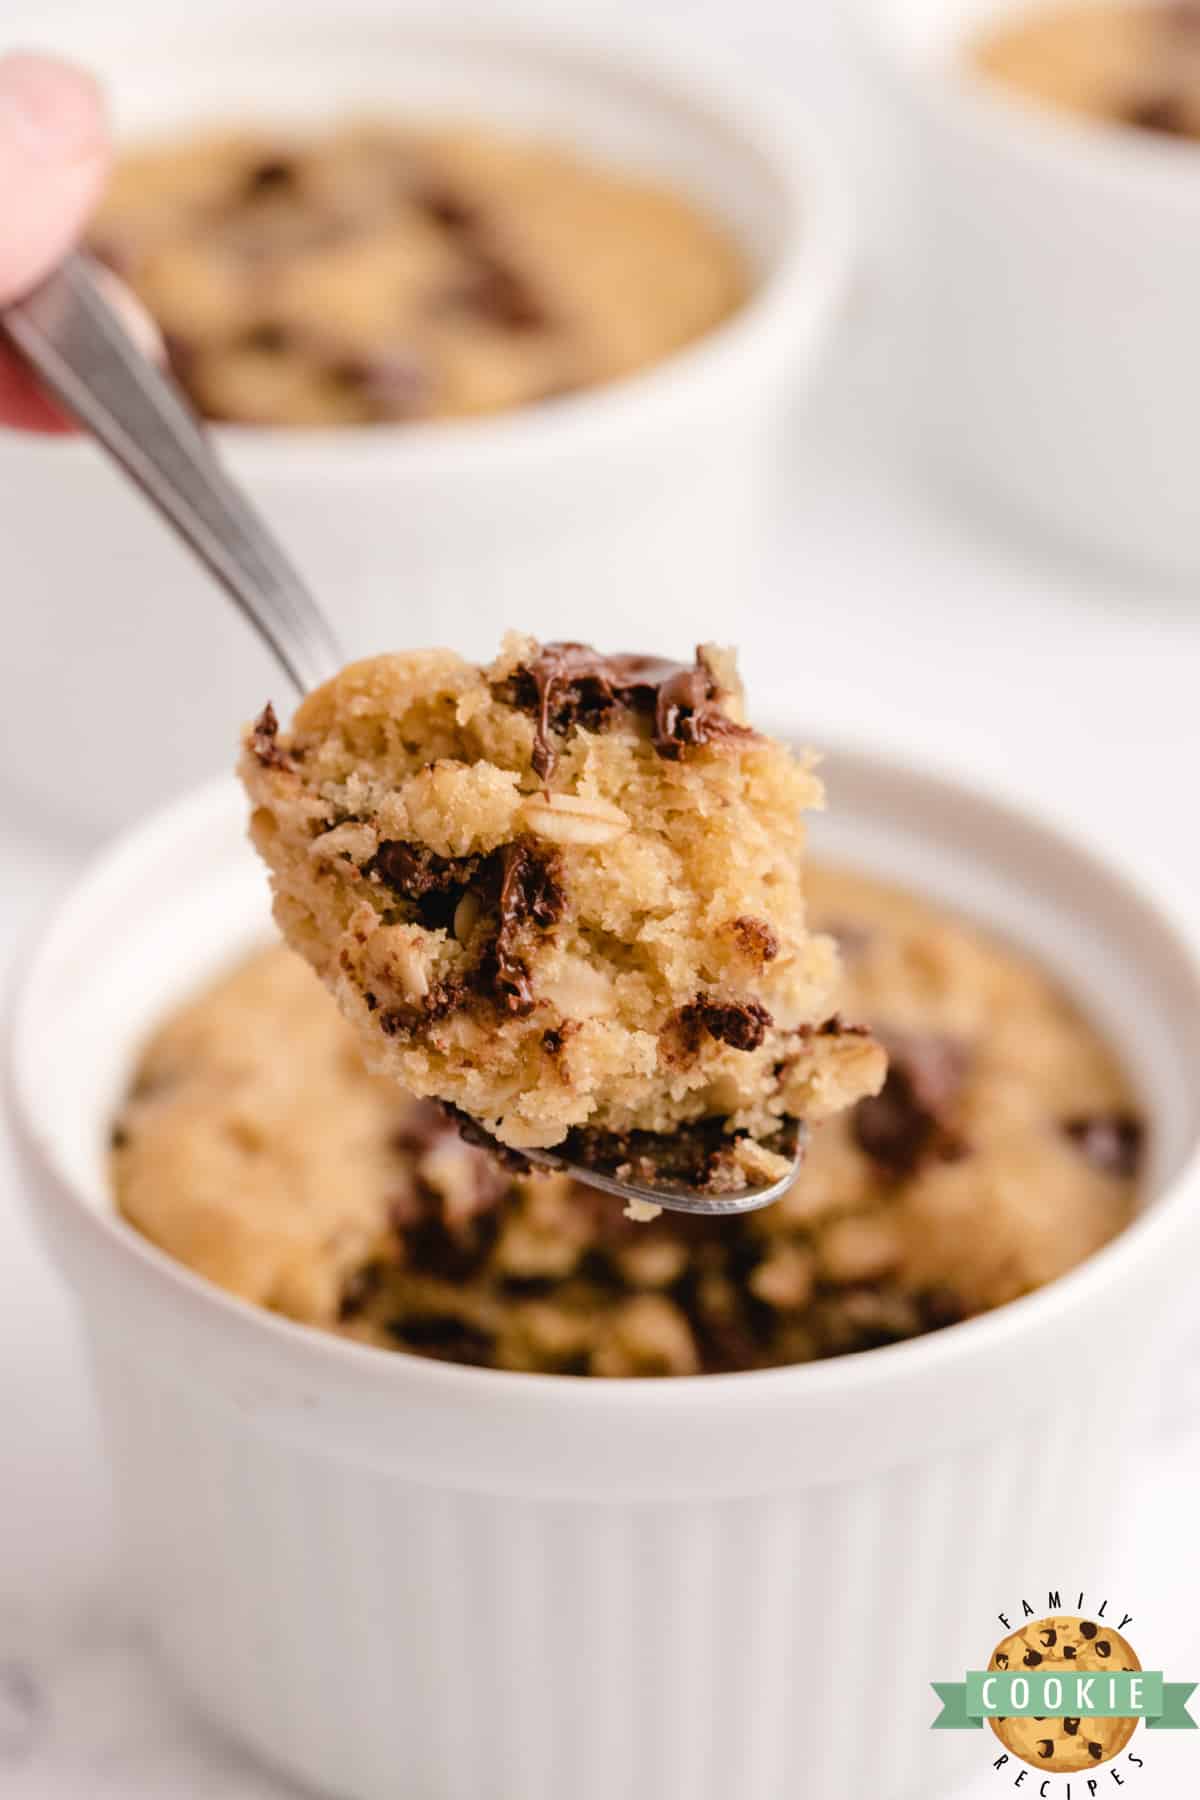 Microwave Oatmeal Chocolate Chip Cookies are soft, chewy and delicious treats that are ready in less than 5 minutes! These easy oatmeal chocolate chip cookies are made in the microwave, they make a perfect single serving treat! 